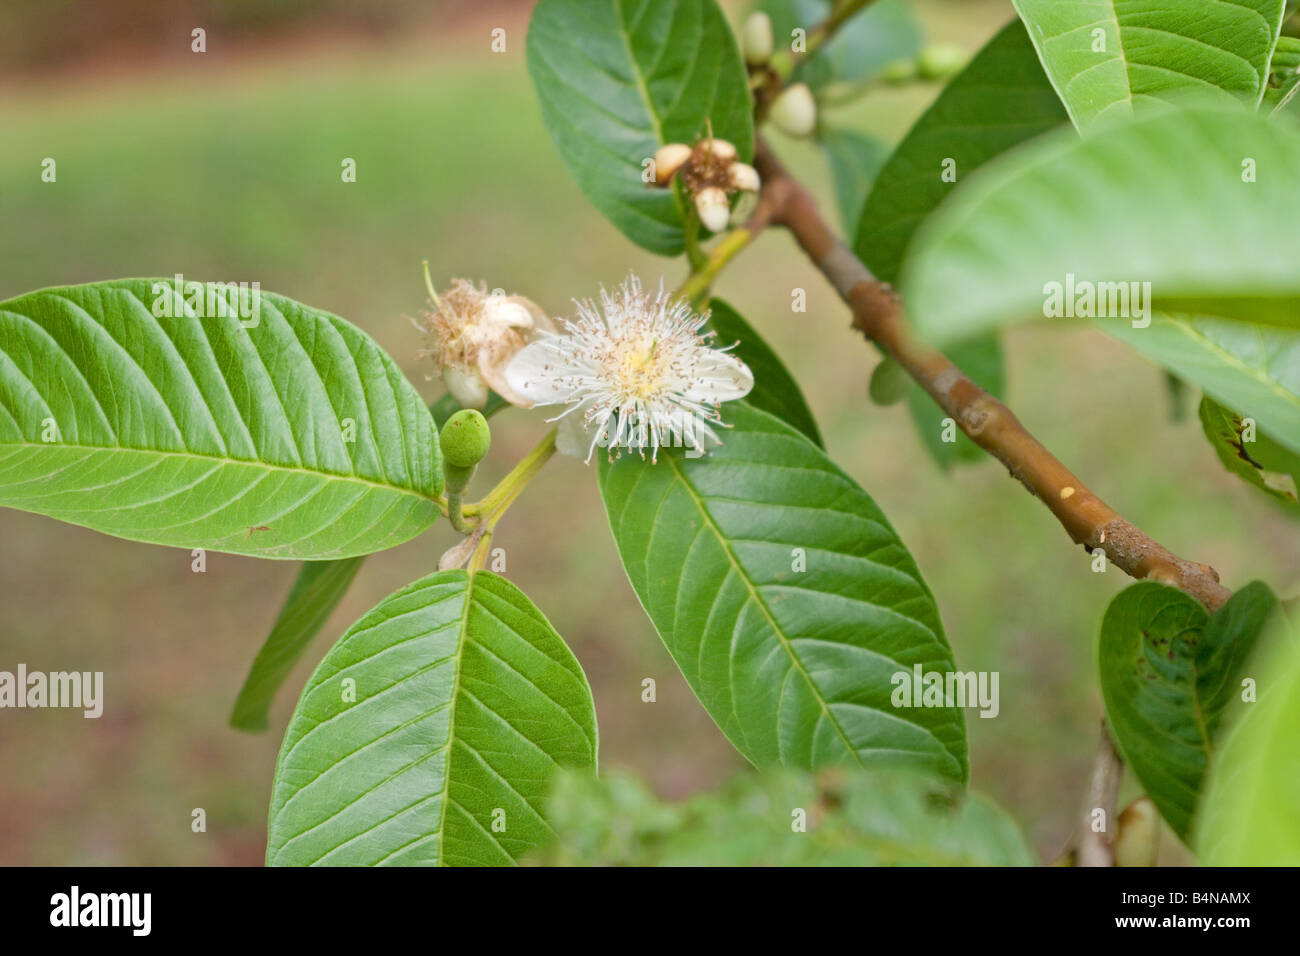 Guava tree leaves and blossom Stock Photo